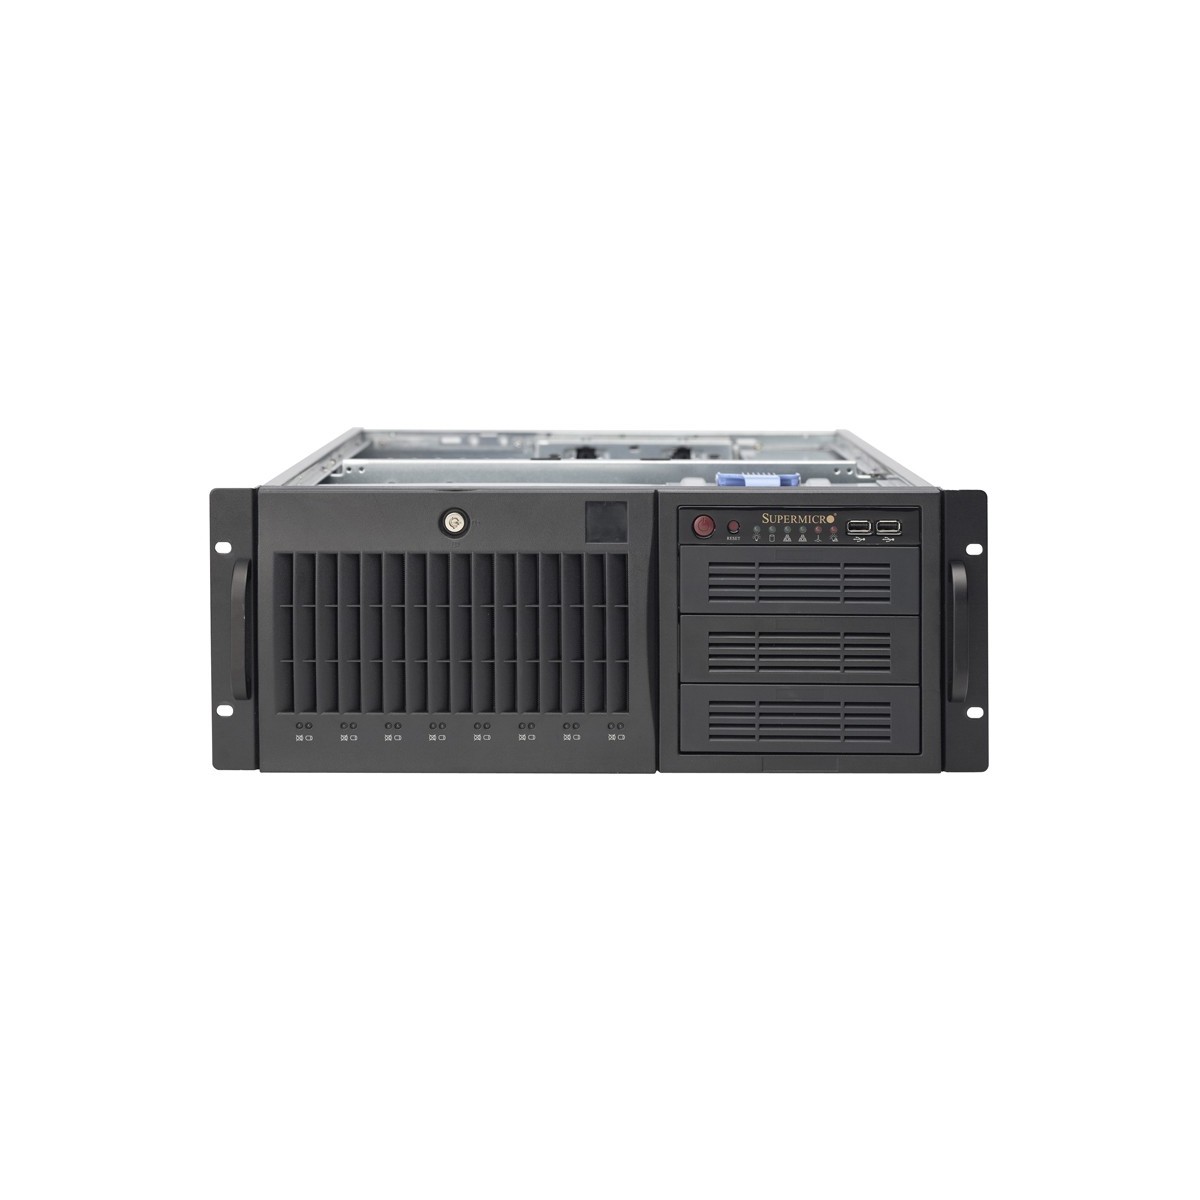 Supermicro 743AC-668B Full Tower Rack-Mountable Workstation / Server Case with 668W 80PLUS Platinum Power Supply - Full Tower - 